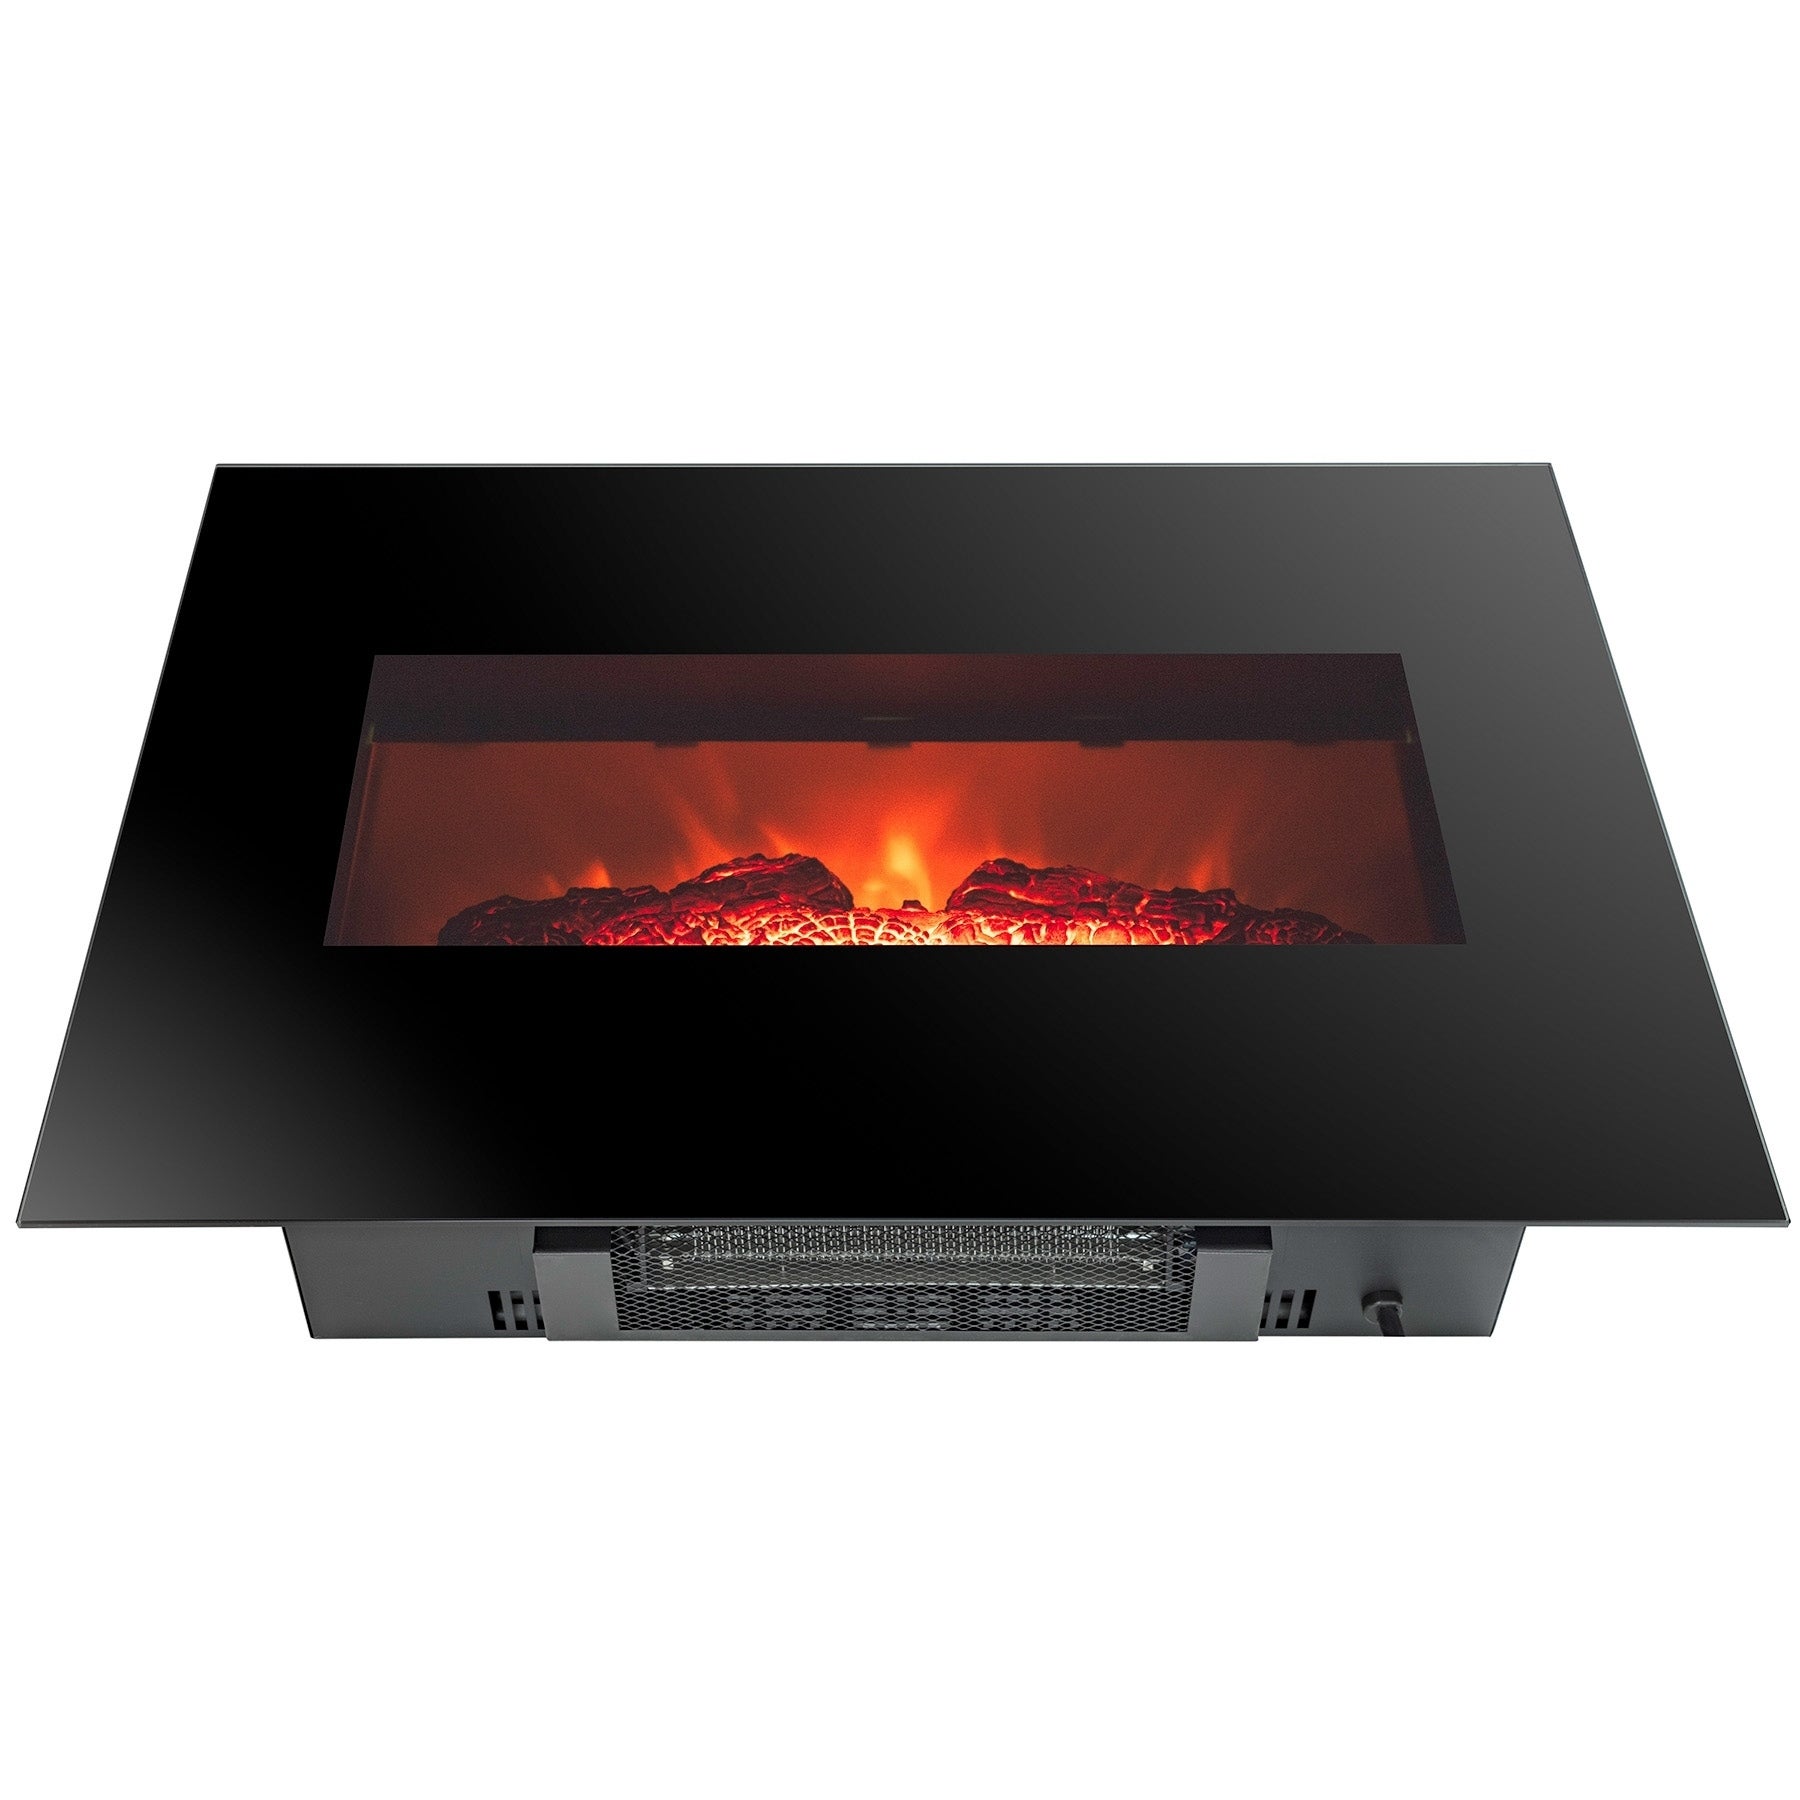 Stainless Steel Electric Fireplace Awesome Golden Vantage Fp0063 26" Wall Mount Electric Fireplace 3d Flames Firebox W Logs Heater